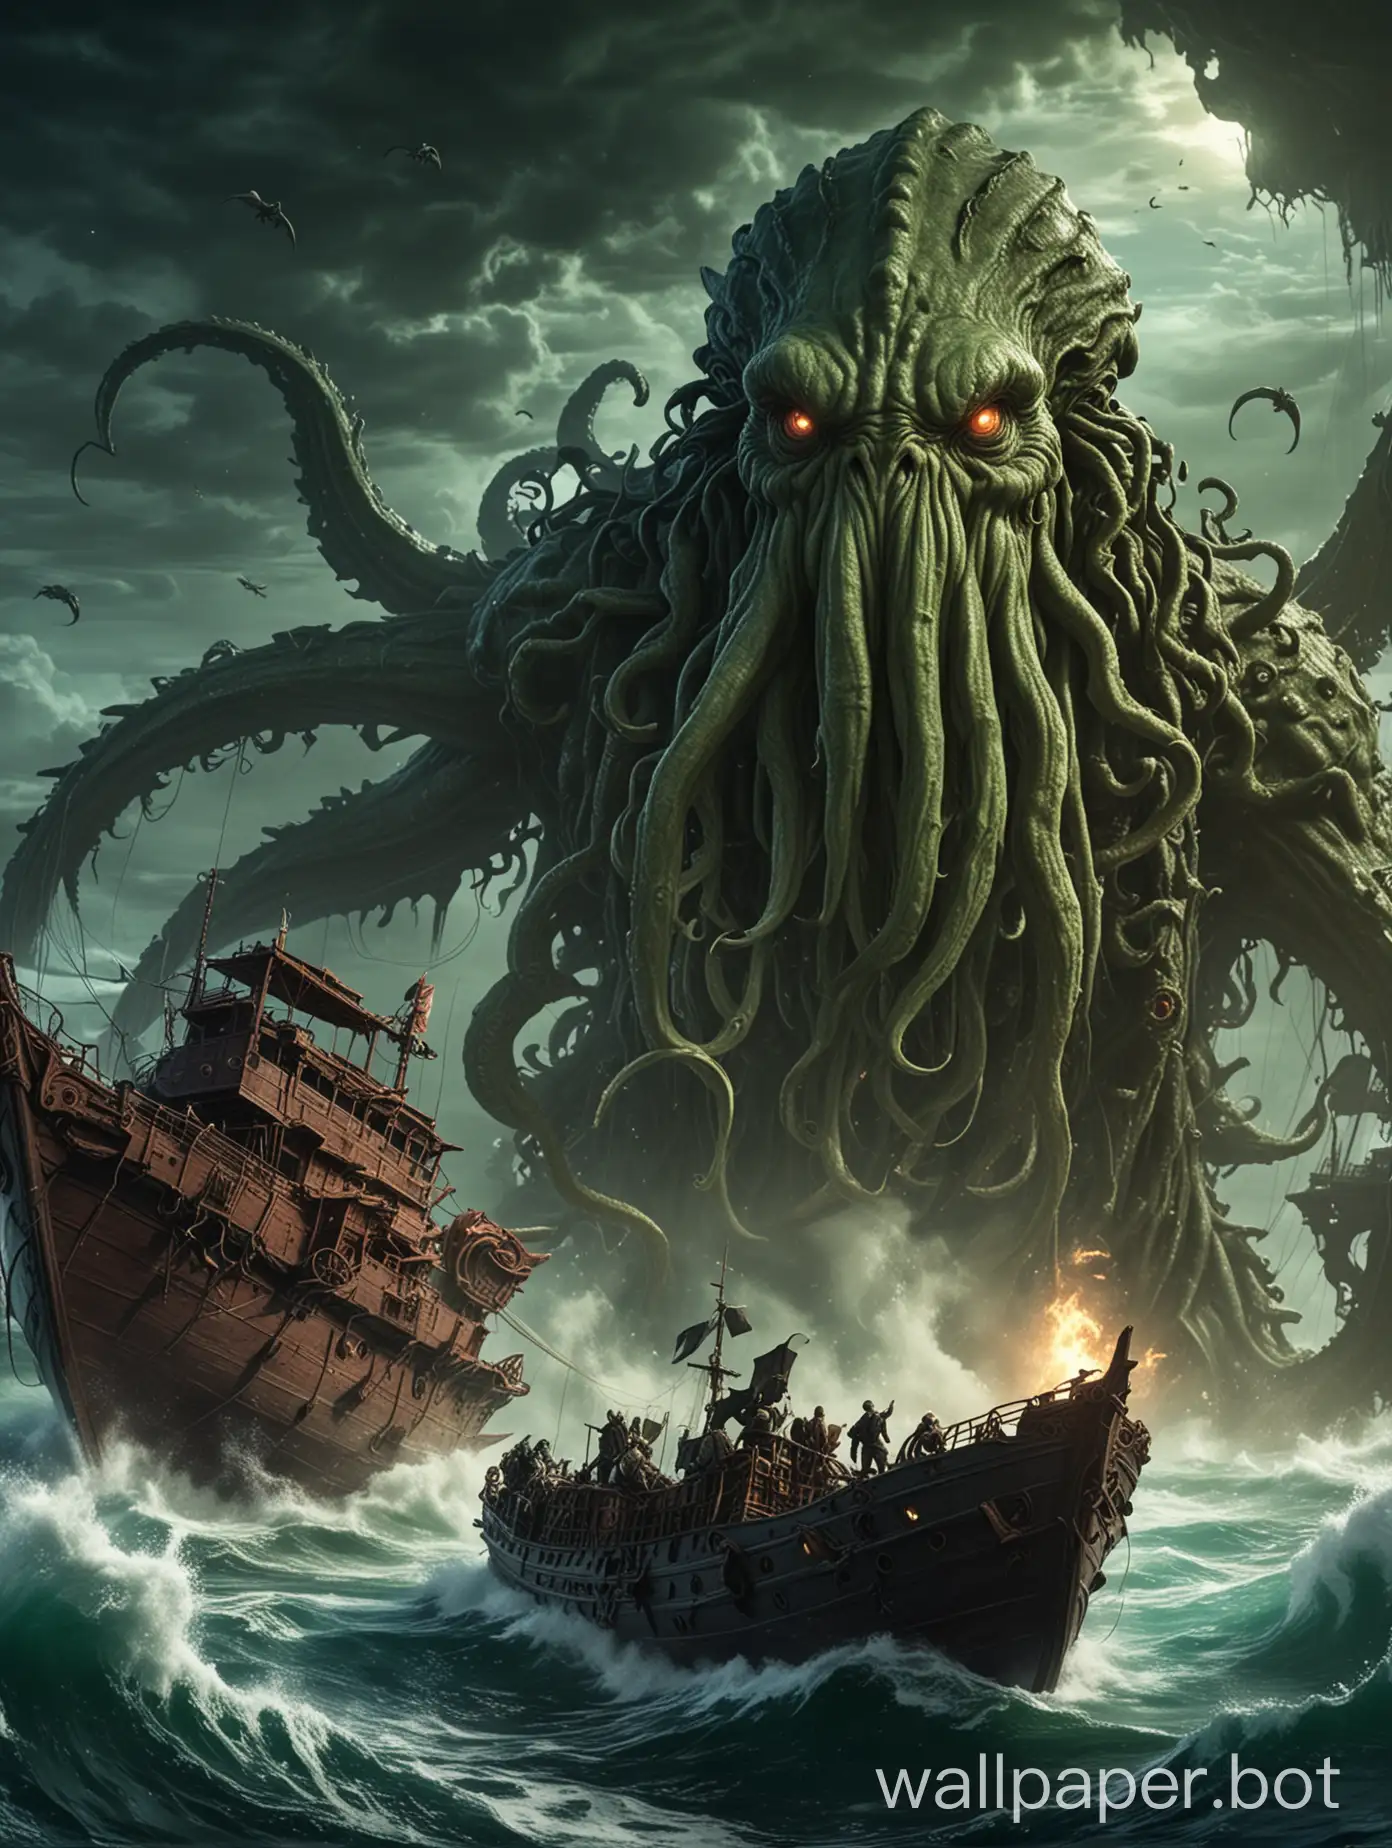 Cthulhu monsters destroying ship with temple sea backgrounds